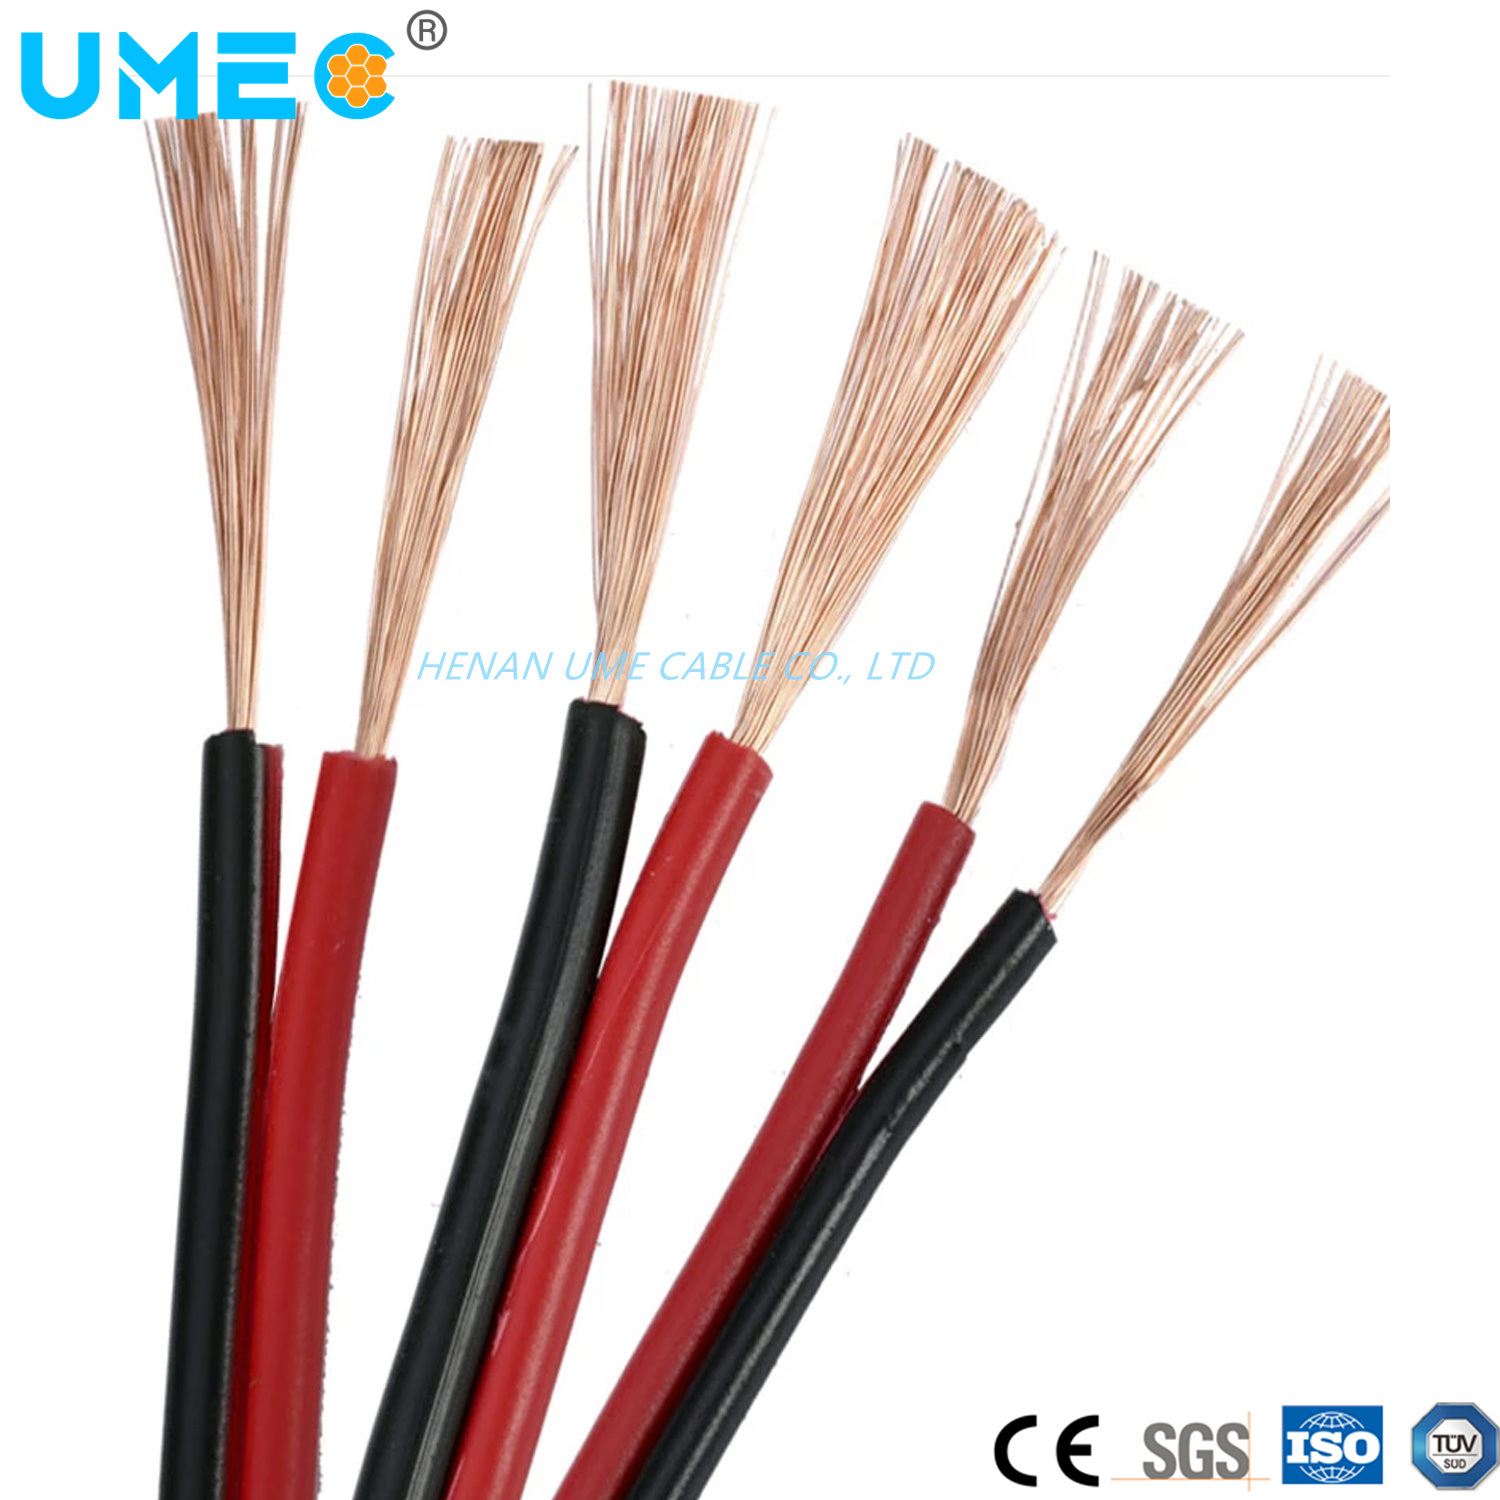 Spt-1/Spt-2/STP-3 20AWG 18AWG 16awgx2core/3core Flexible Flat Twin Electrical Cable 300V Spt